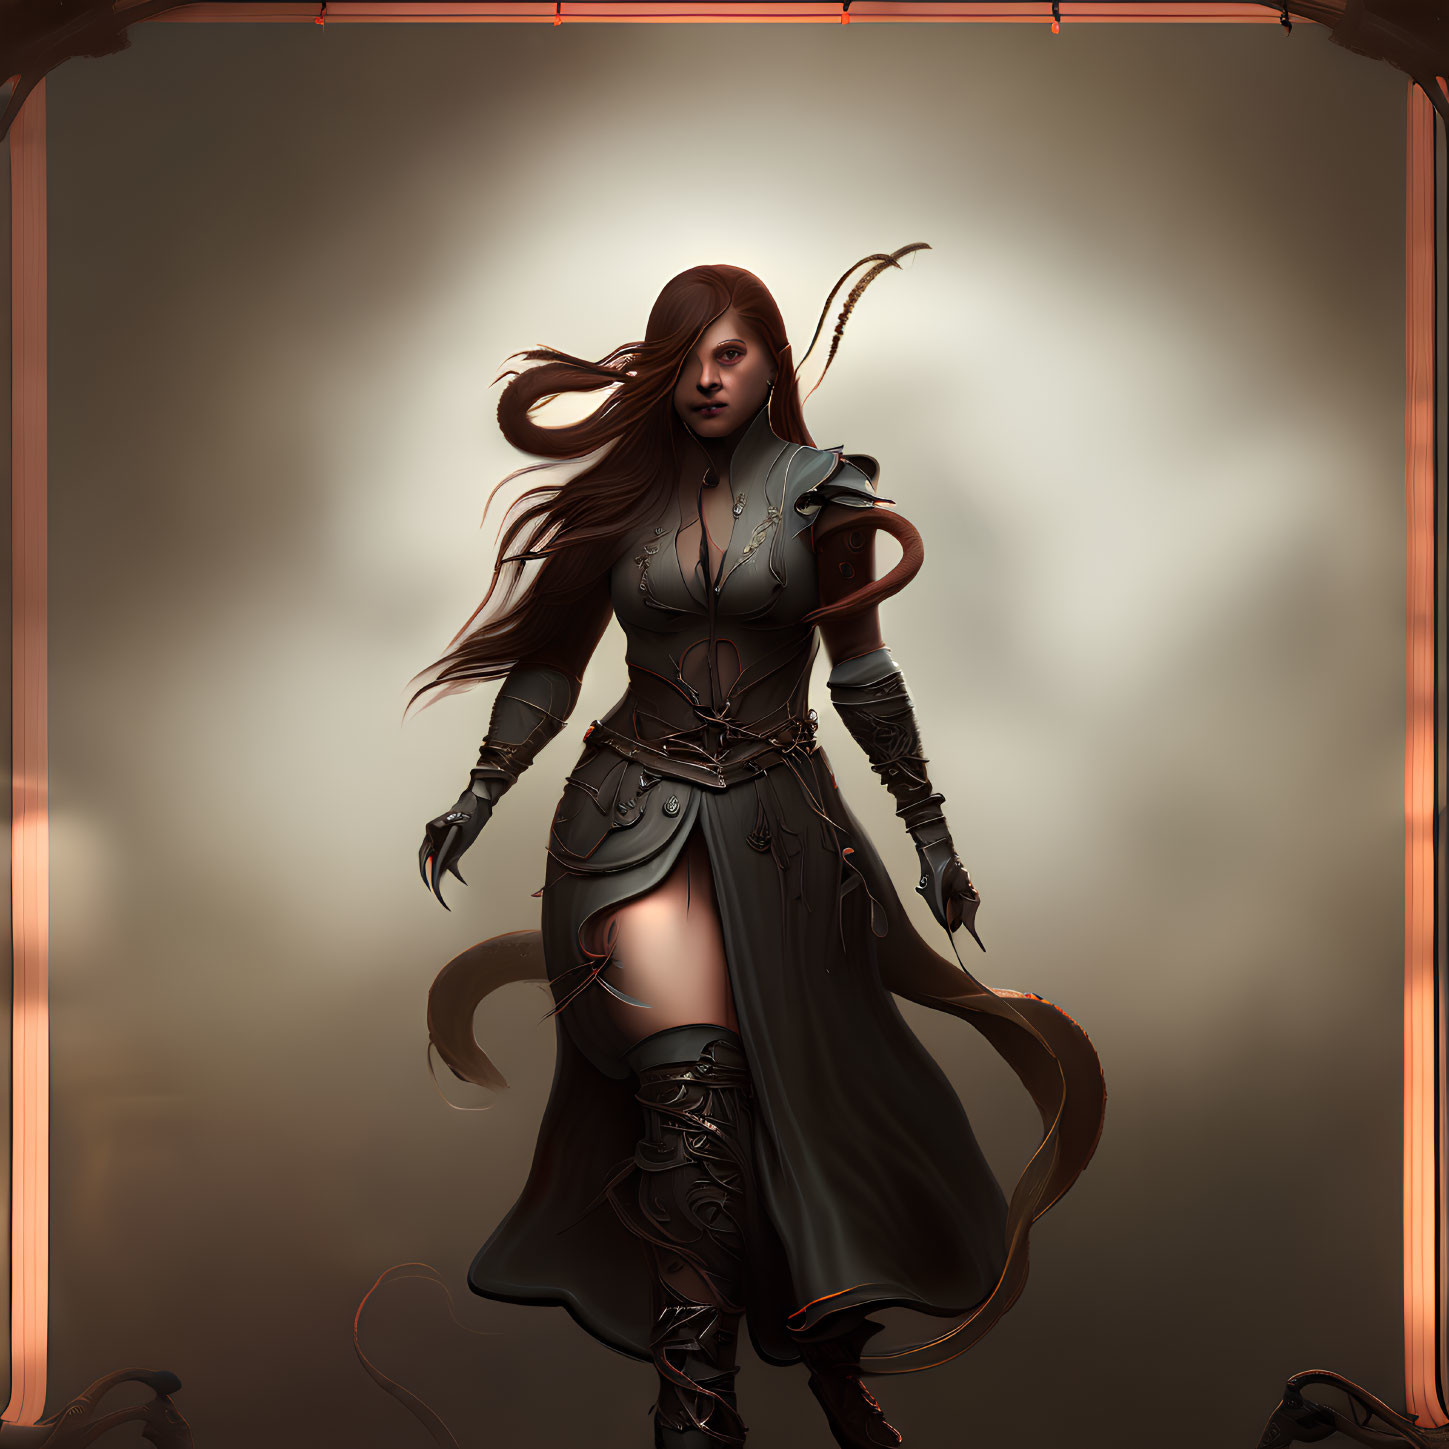 Fantasy female warrior digital artwork with flowing hair and leather armor